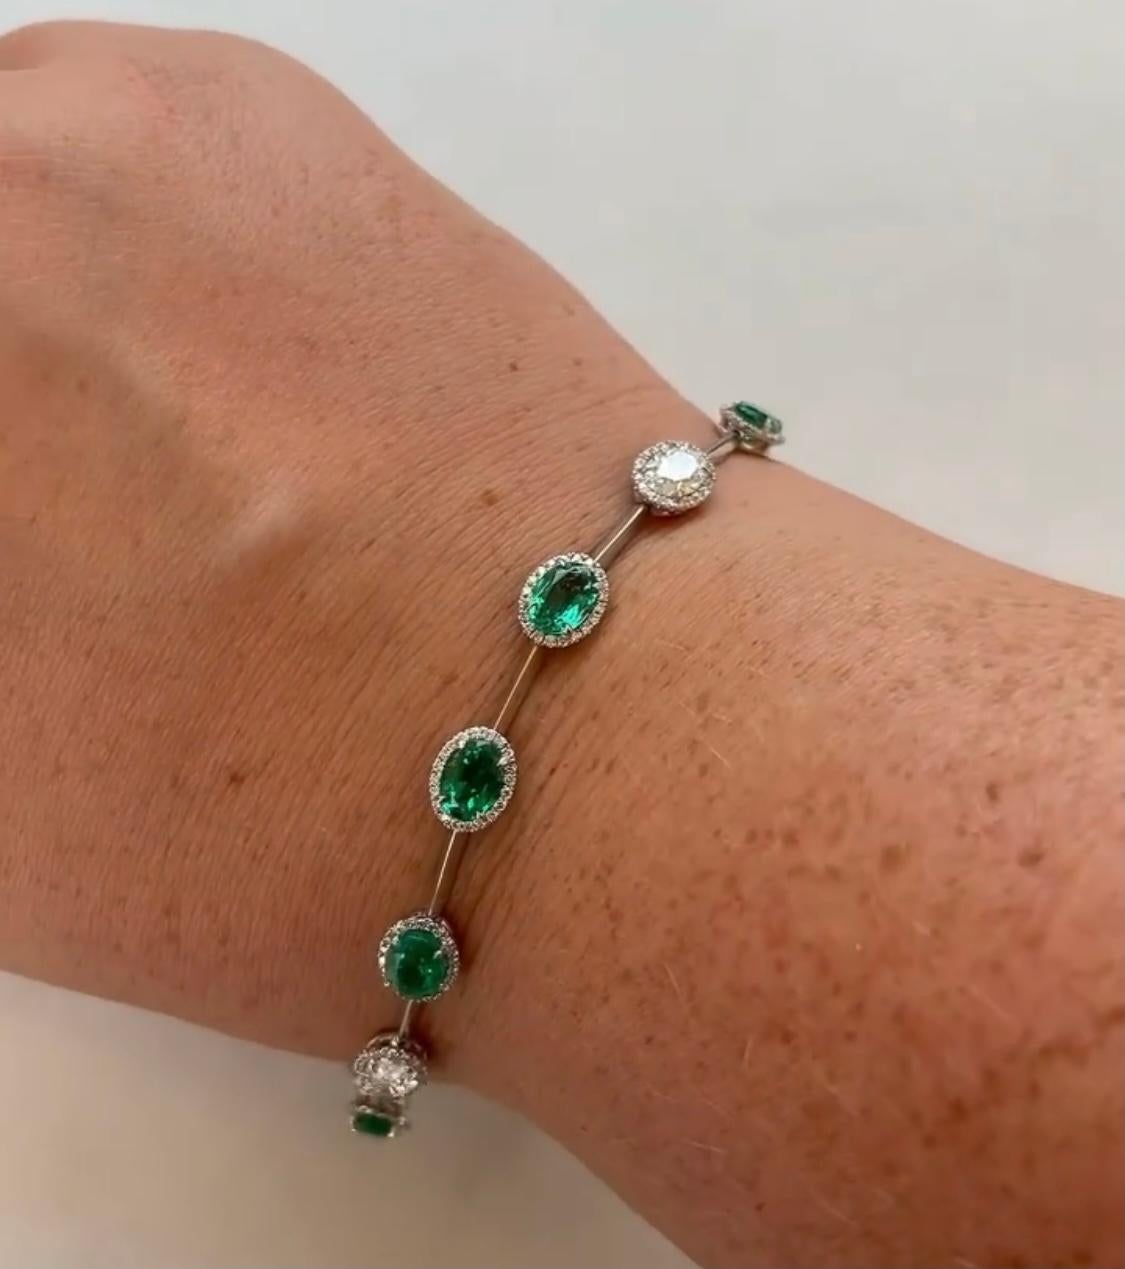 Abstract and Sophisticated Emerald and Diamond Bracelet.

8 Oval Emeralds weighing 6.30 Carats.
2 Oval Diamonds weighing 1.25 Carats.
190 Round Diamonds weighing 0.95 Carats.

Set in Platinum.